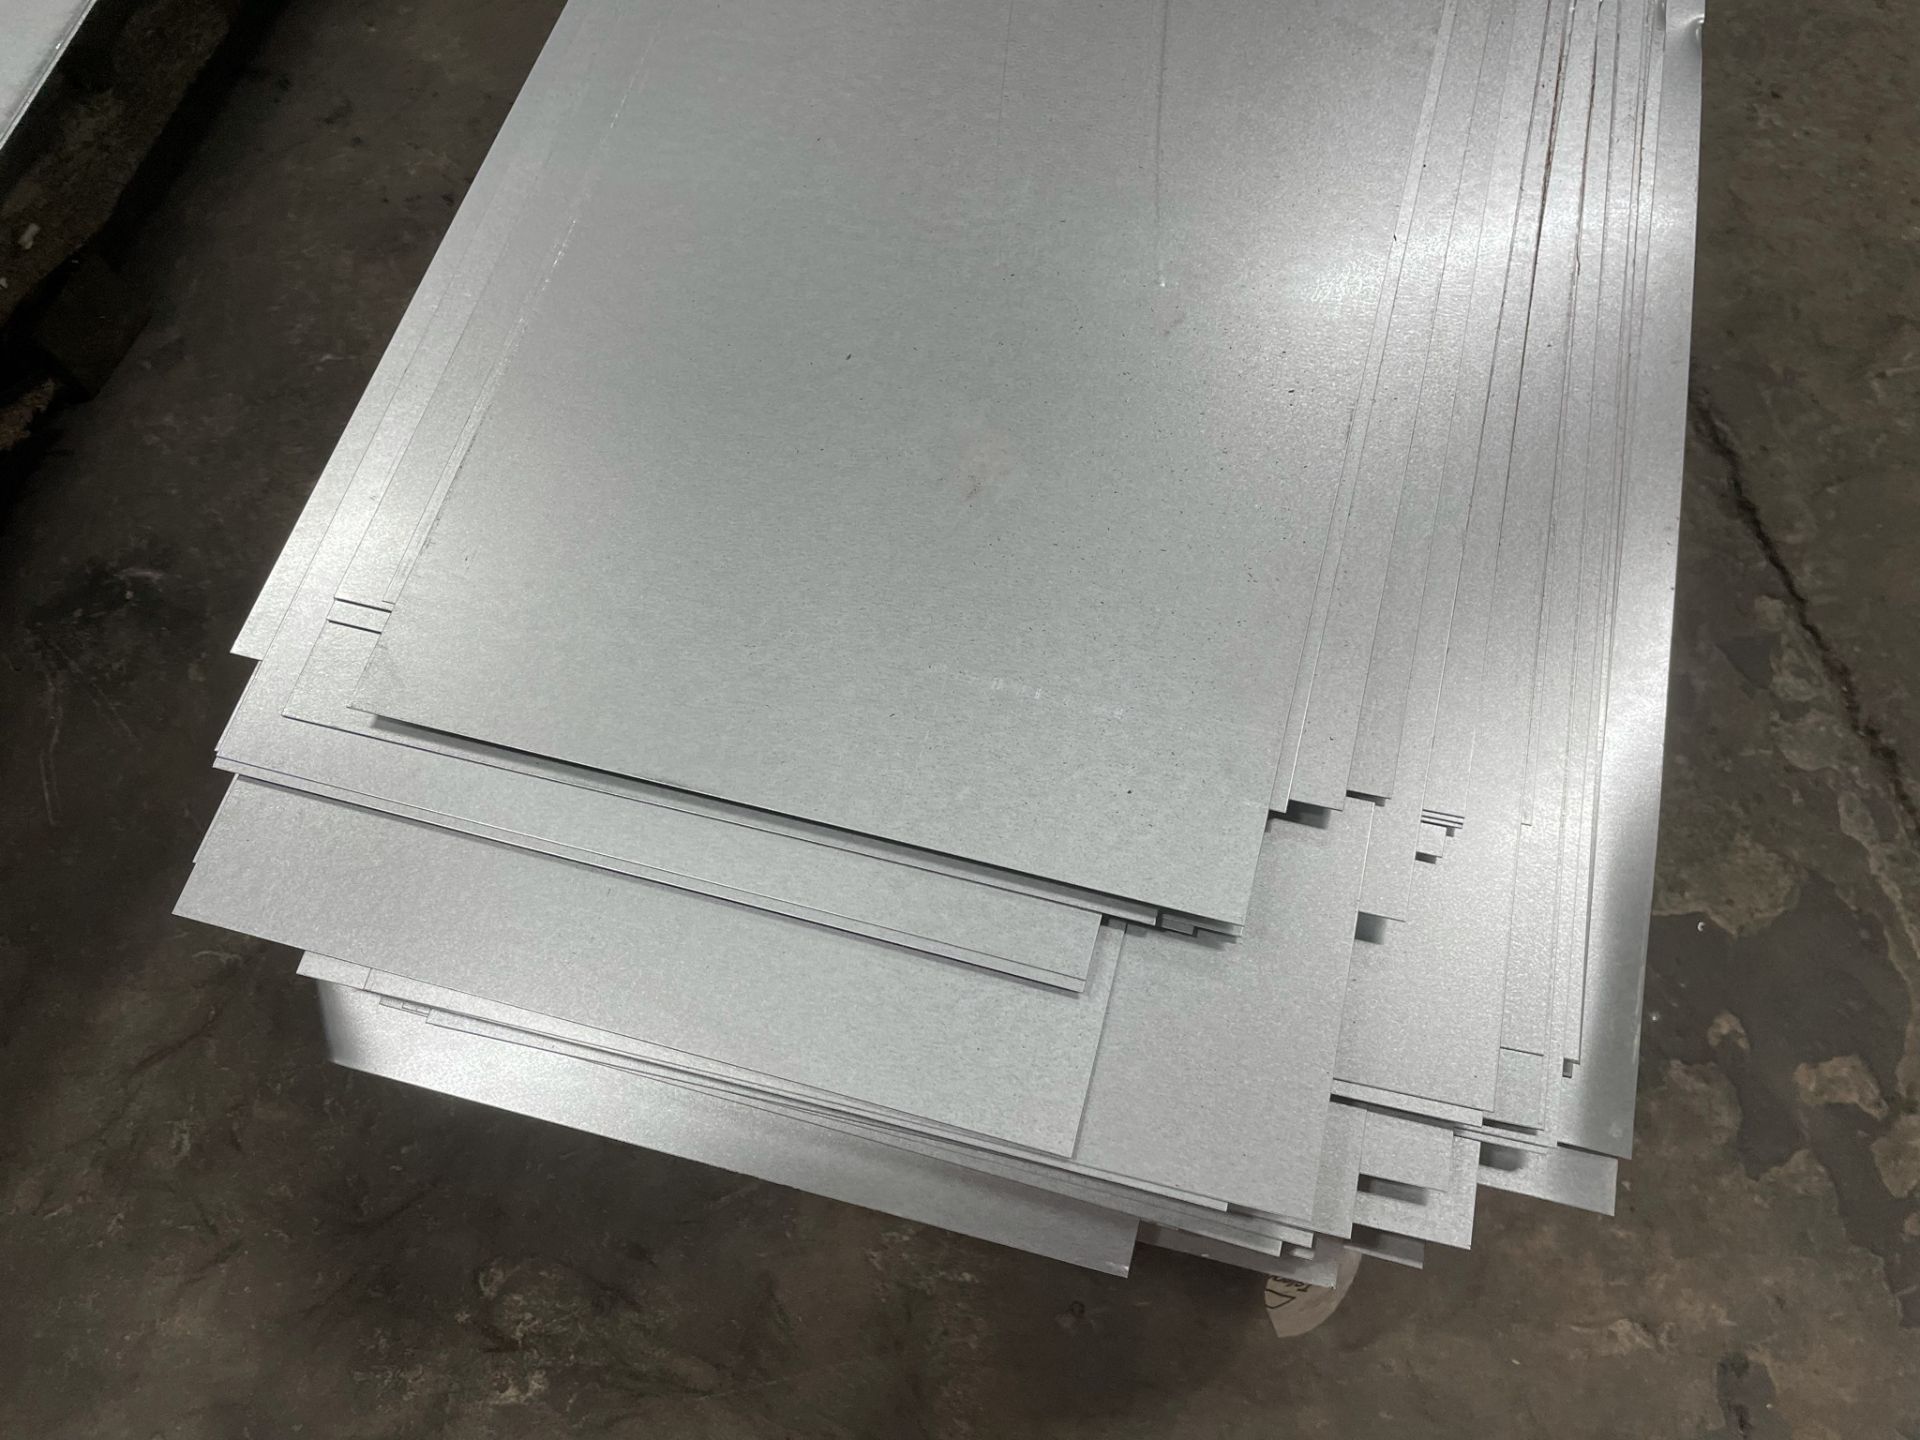 Approximately 180 x 1mm Sheets of Selco Aluminium | Size: 255 x 30cm - Image 2 of 2